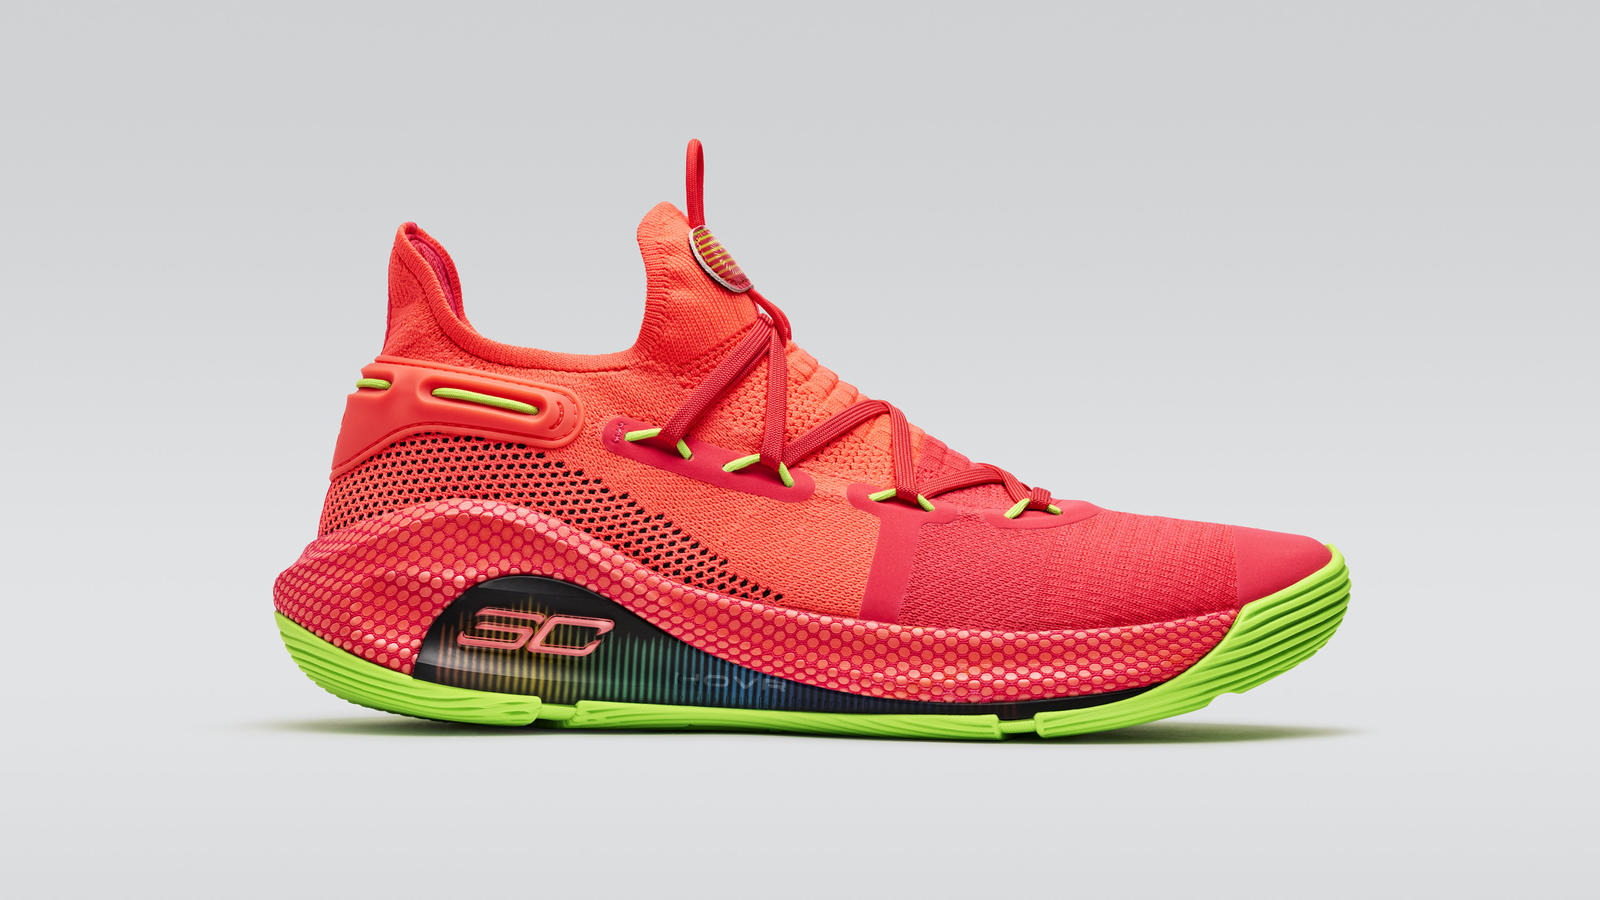 Steph Curry's new sneakers drop today — Here's where to buy them